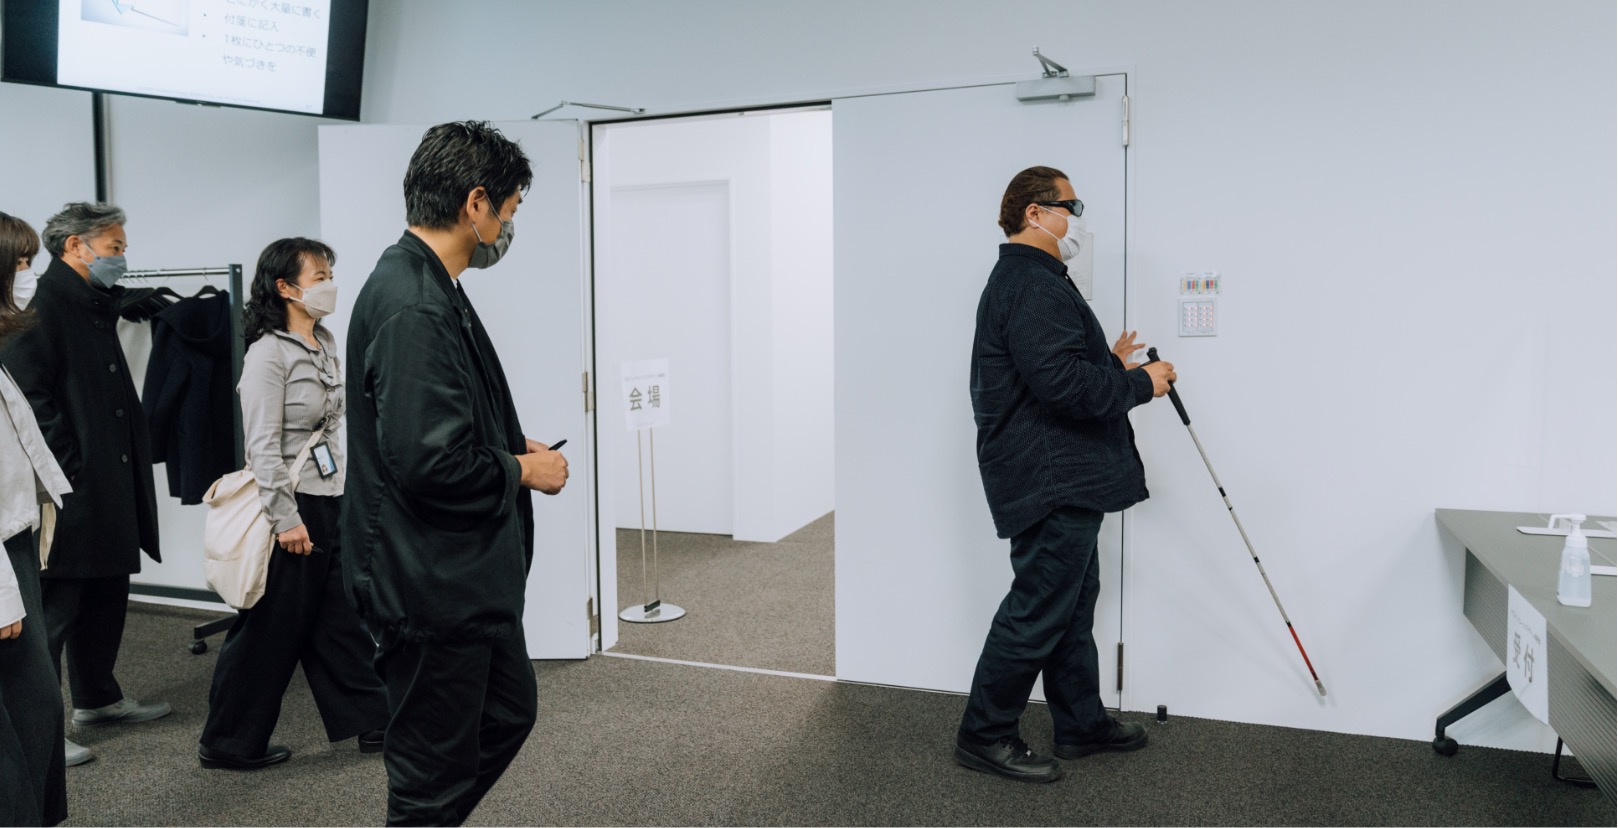 A group of people in a room, in which a blind person is touching the wall with his hand and white cane.